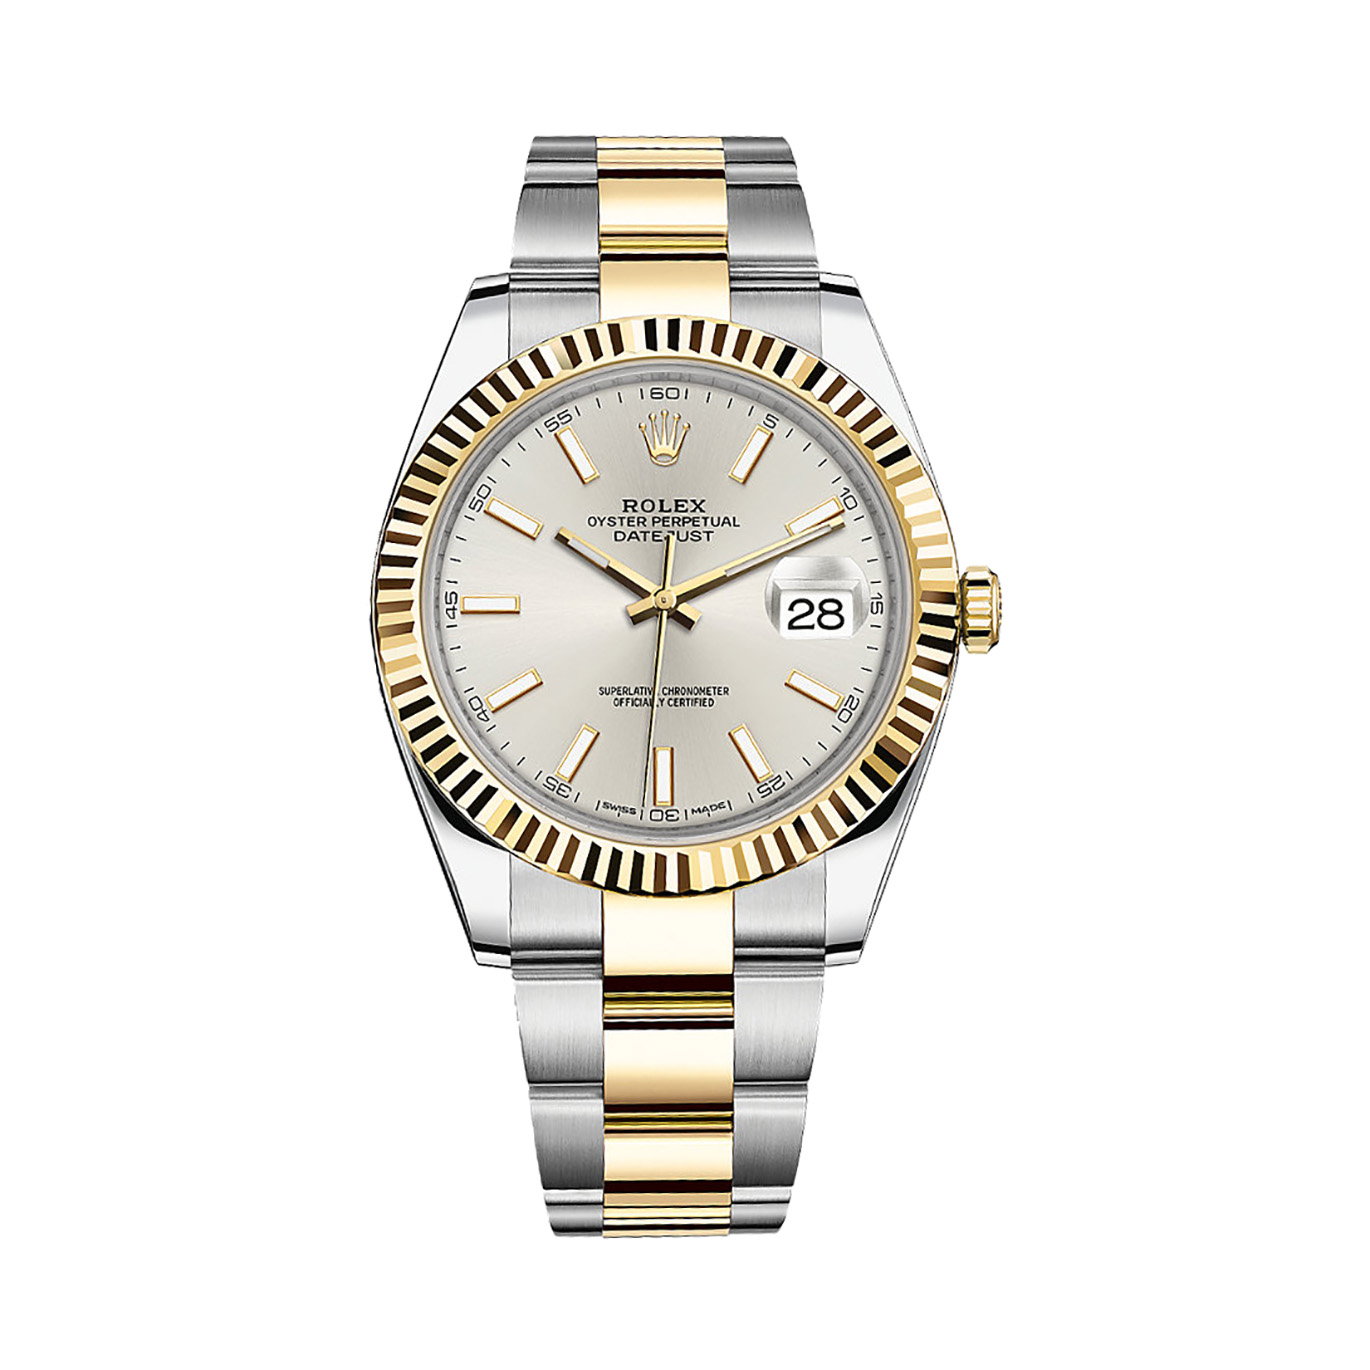 Datejust 41 126333 Gold & Stainless Steel Watch (Silver)